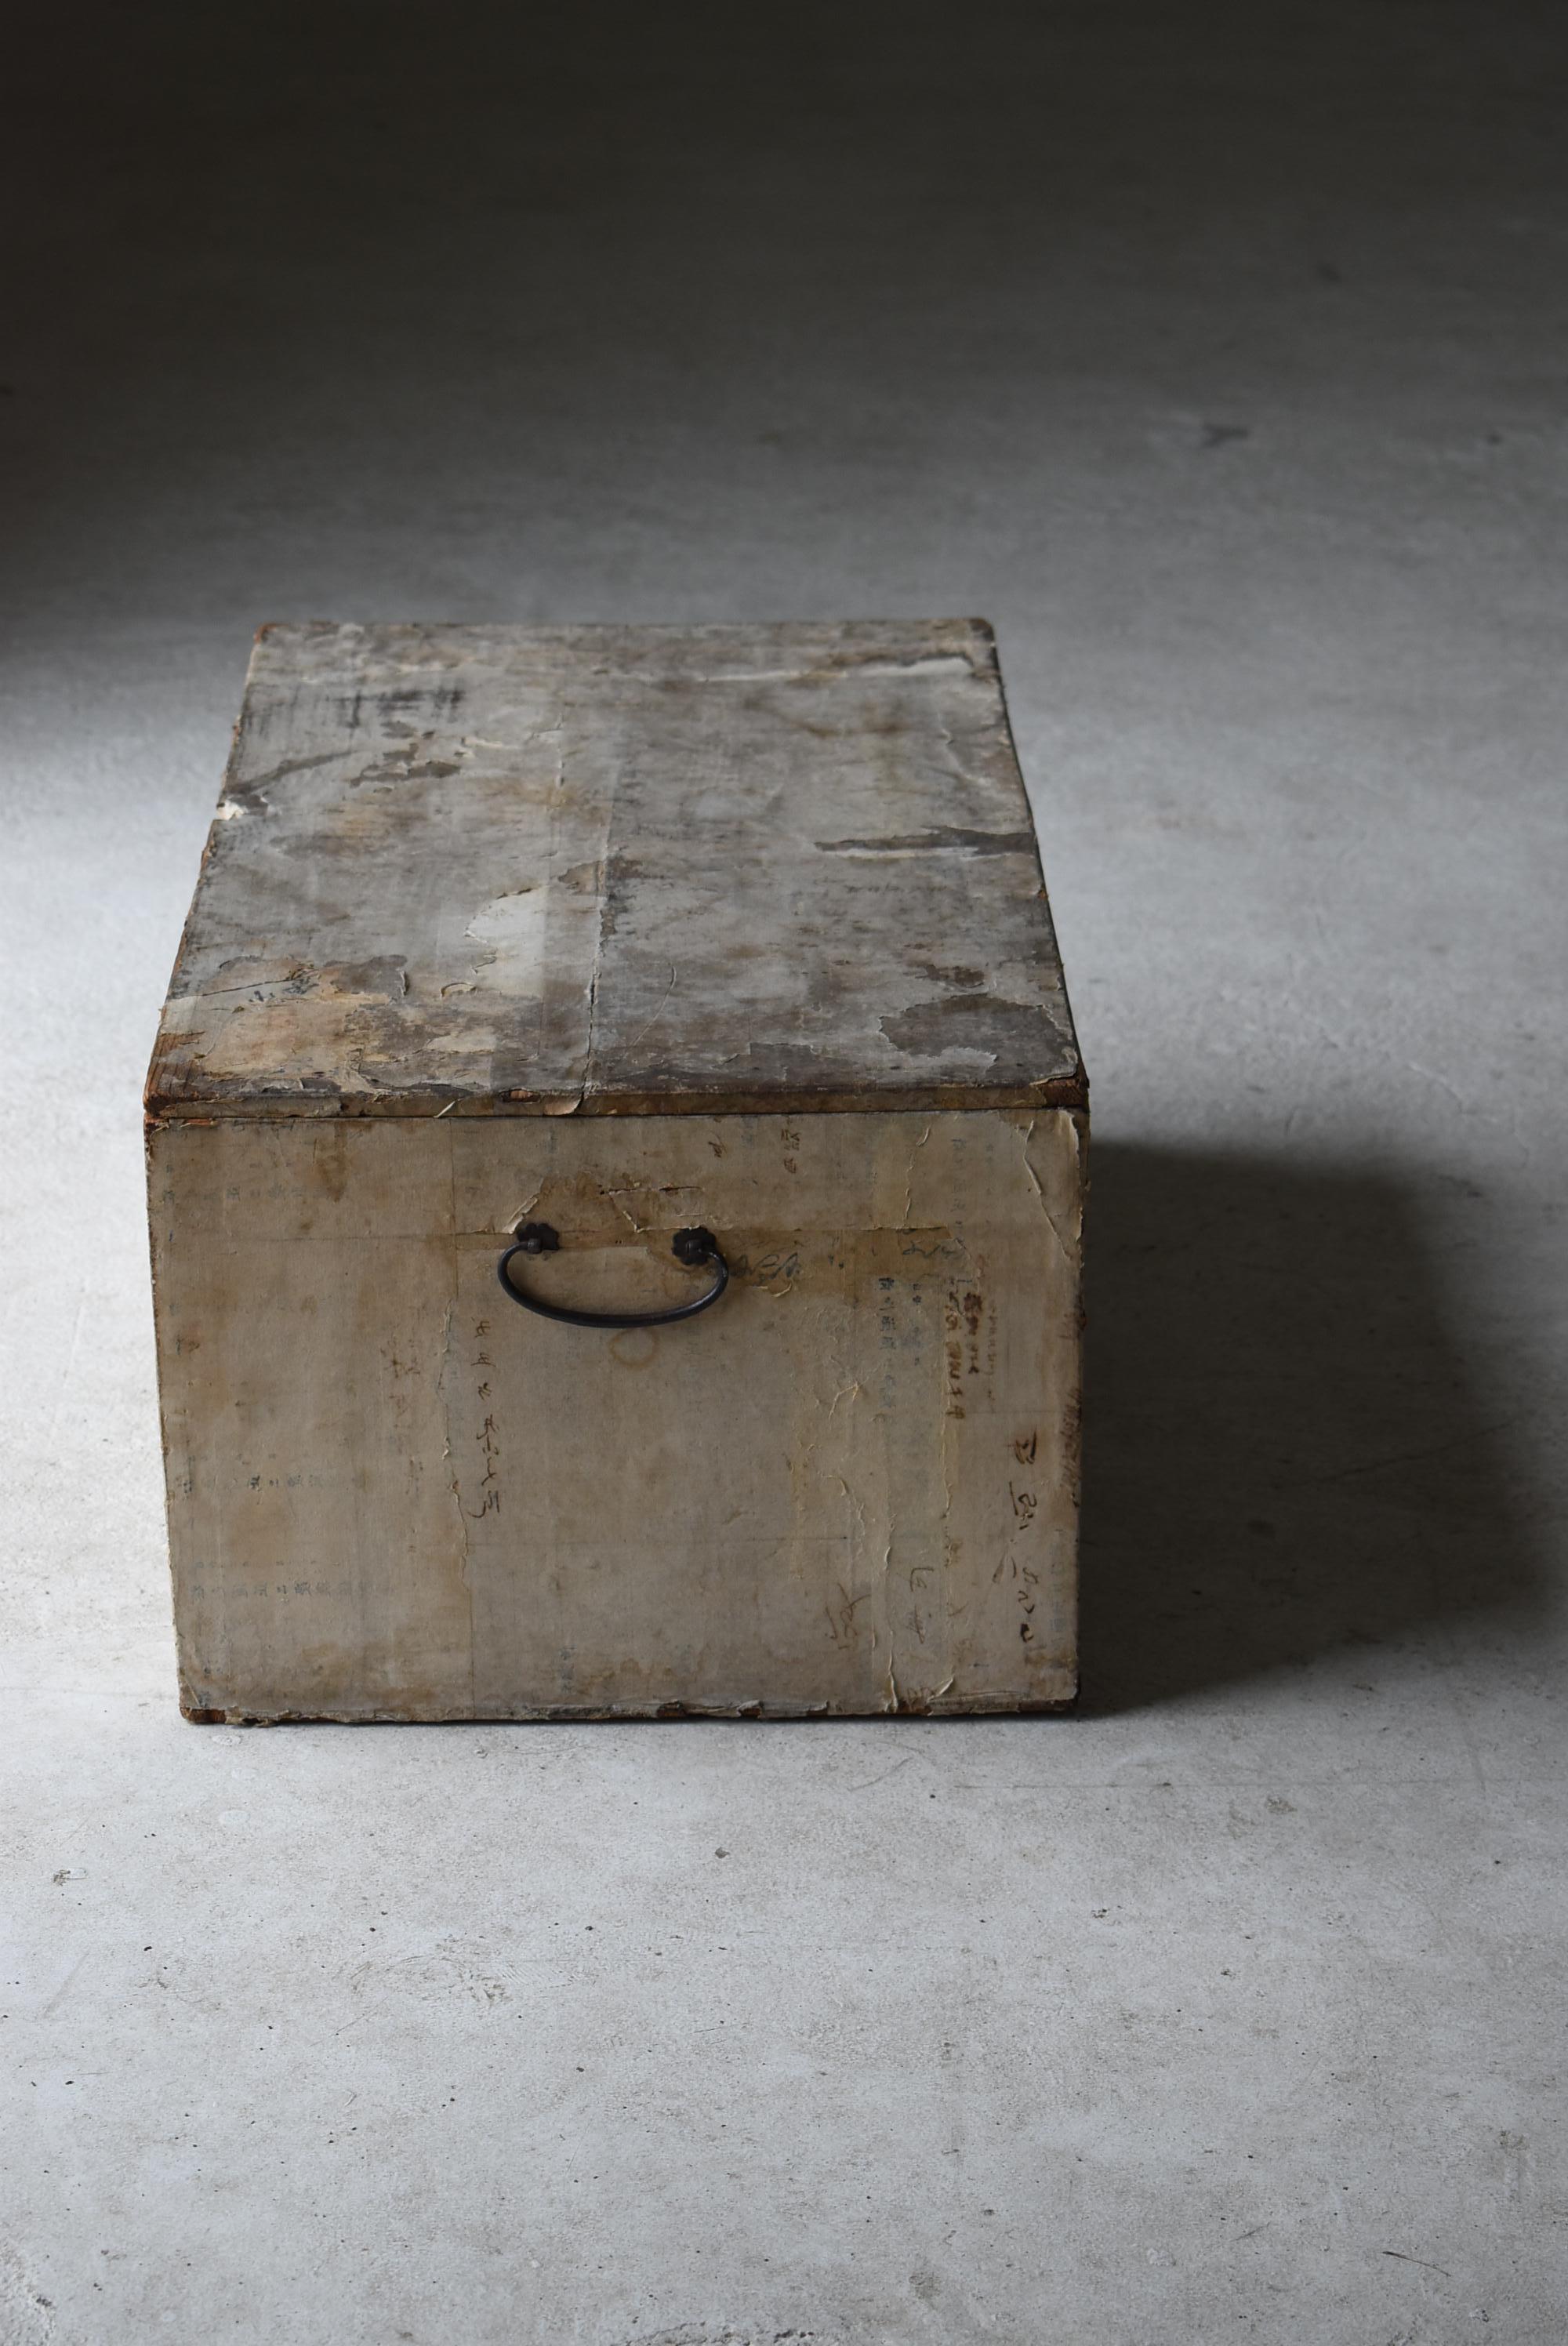 Japanese Antique Paper-Covered Wooden Box 1860s-1920s / Sofa Table Wabi Sabi 11